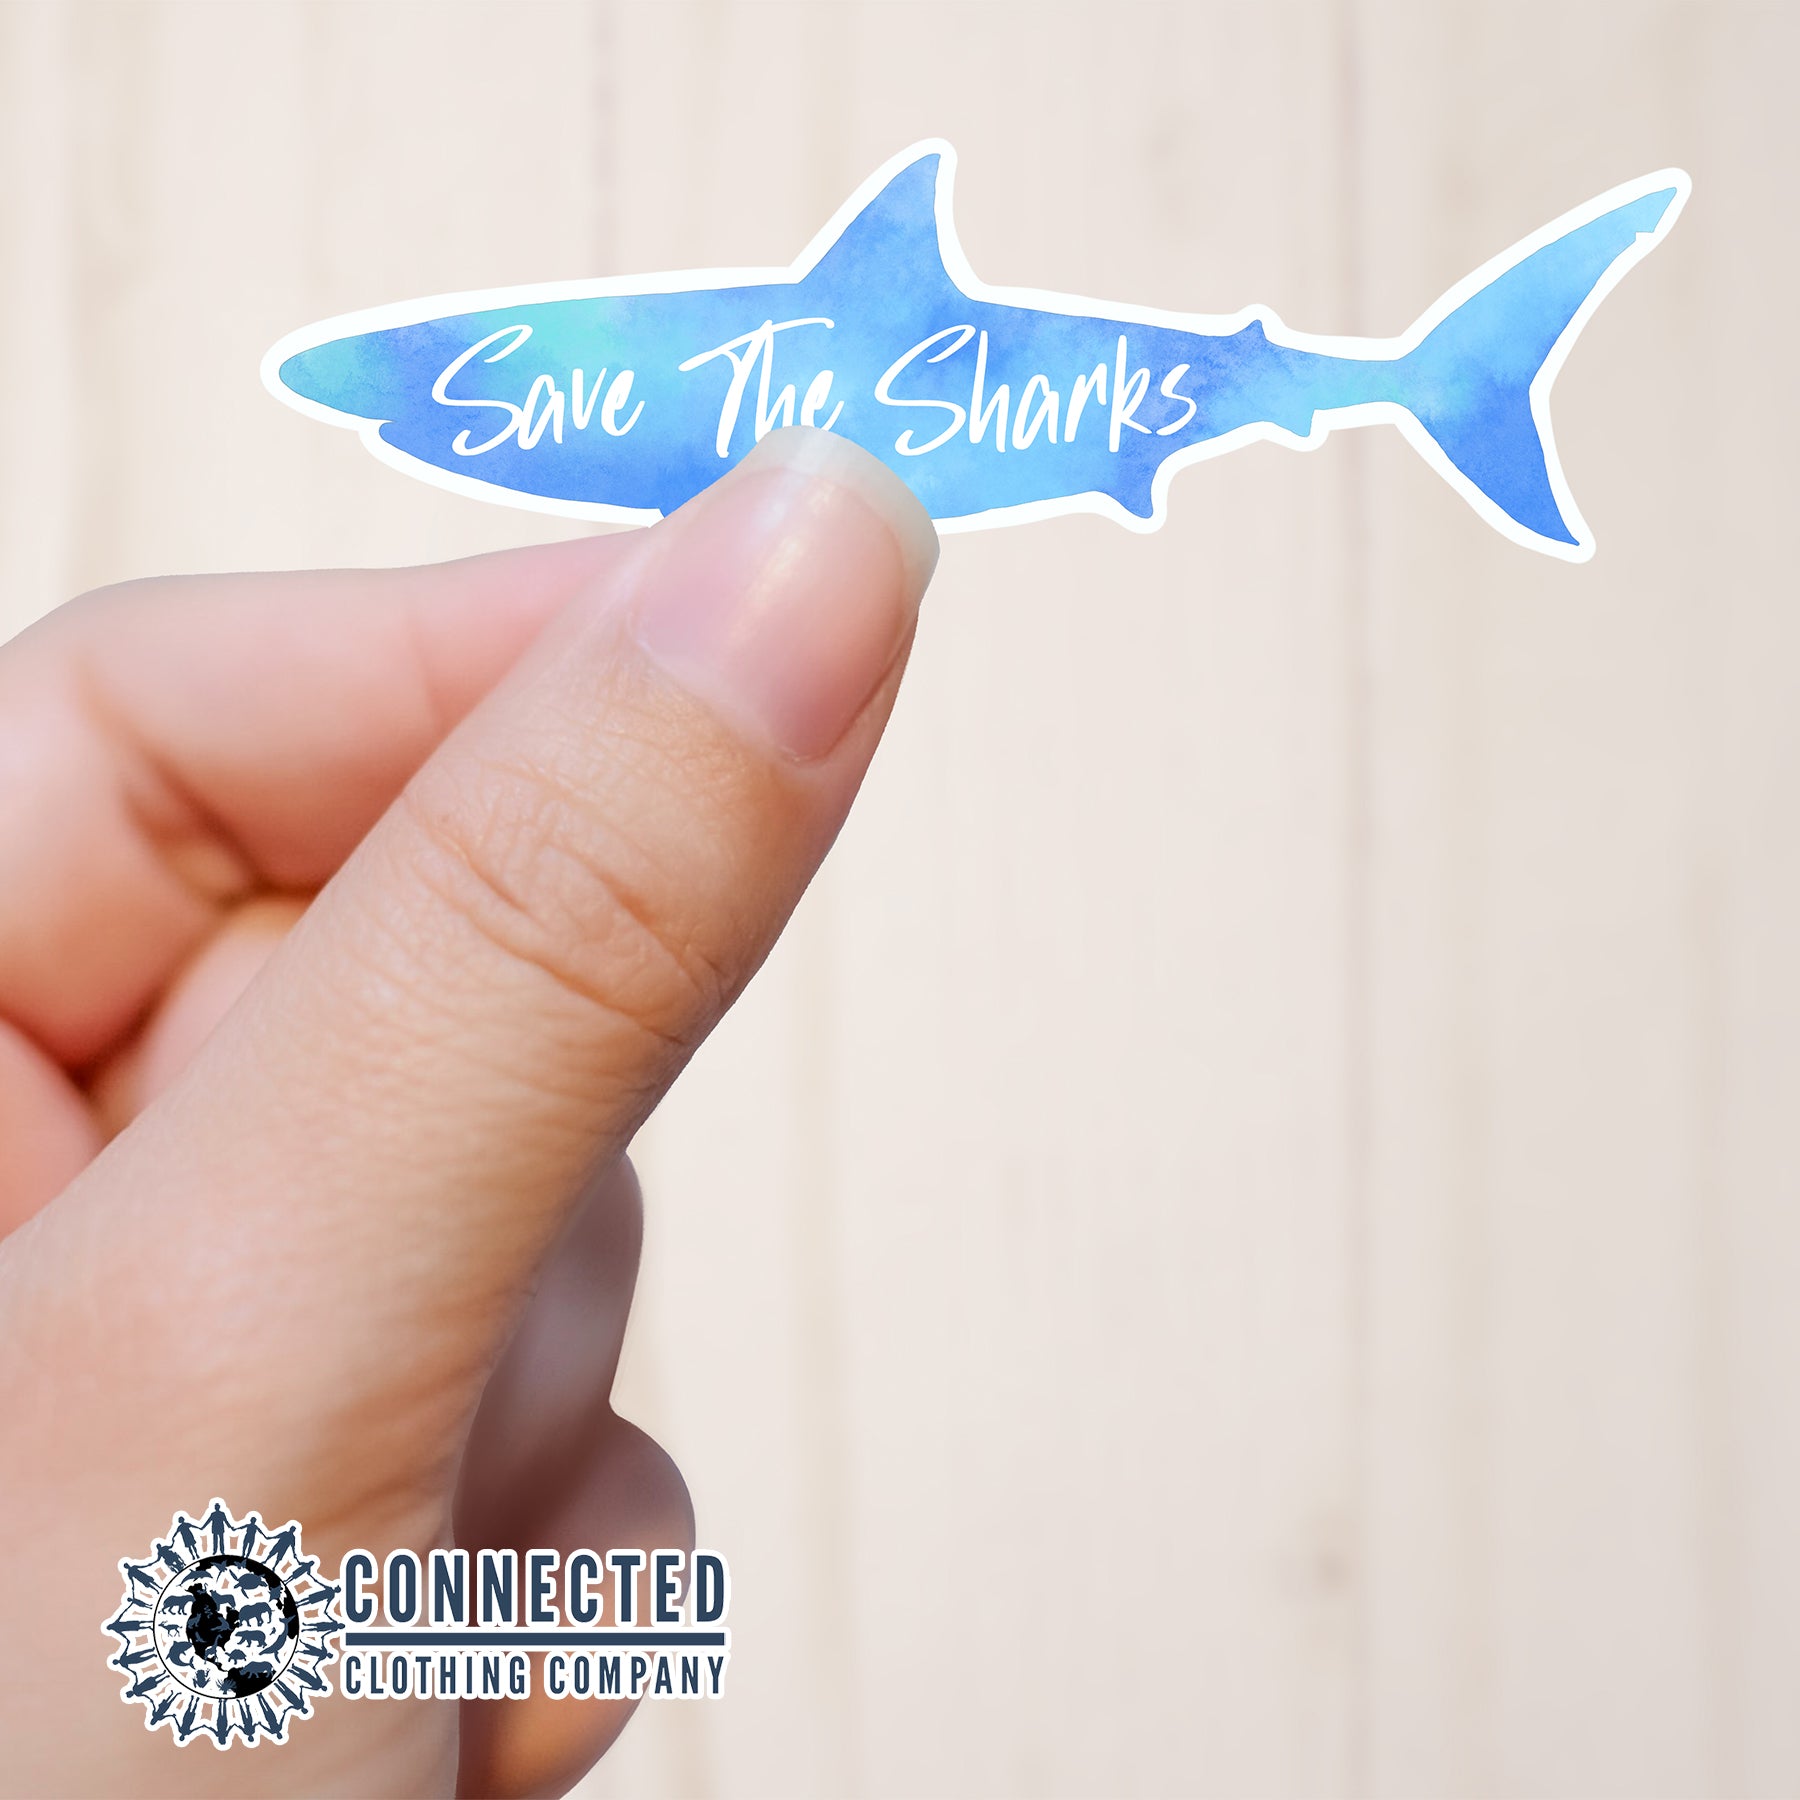 Save The Sharks Sticker - architectconstructor - 10% of proceeds donated to ocean conservation